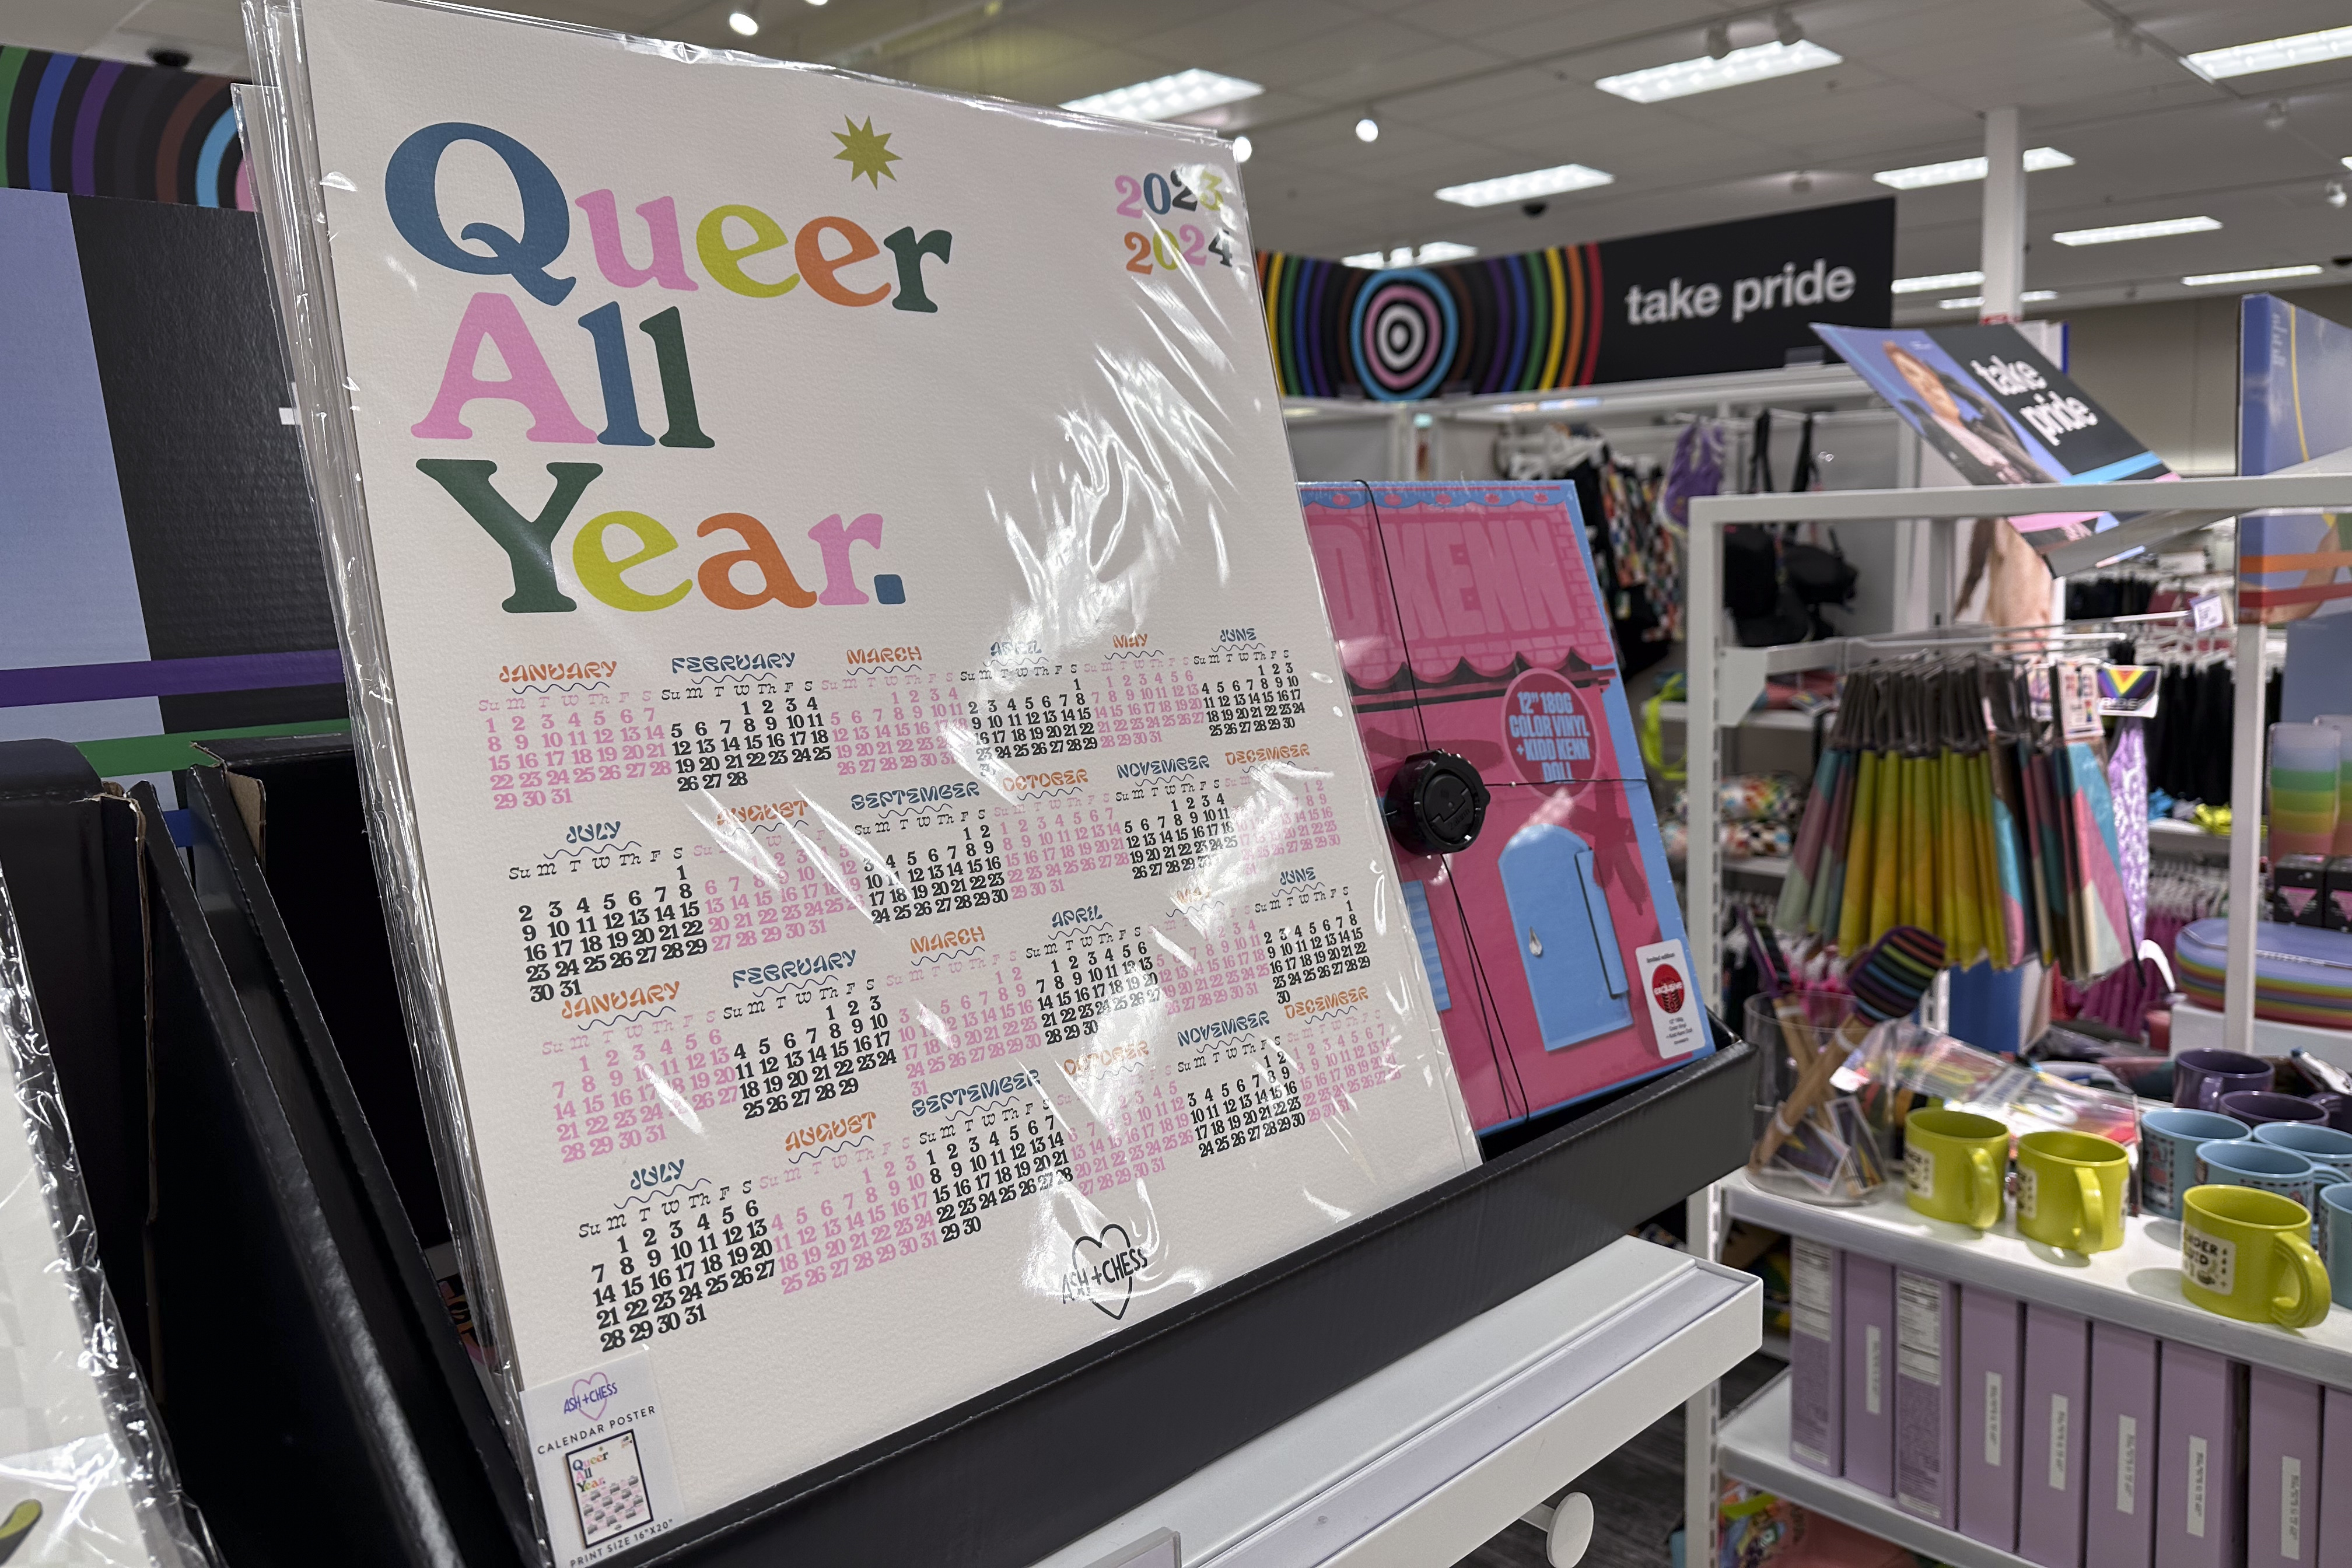 https://globalnews.ca/wp-content/uploads/2023/05/pride-month-target-store.jpg?quality=85&strip=all